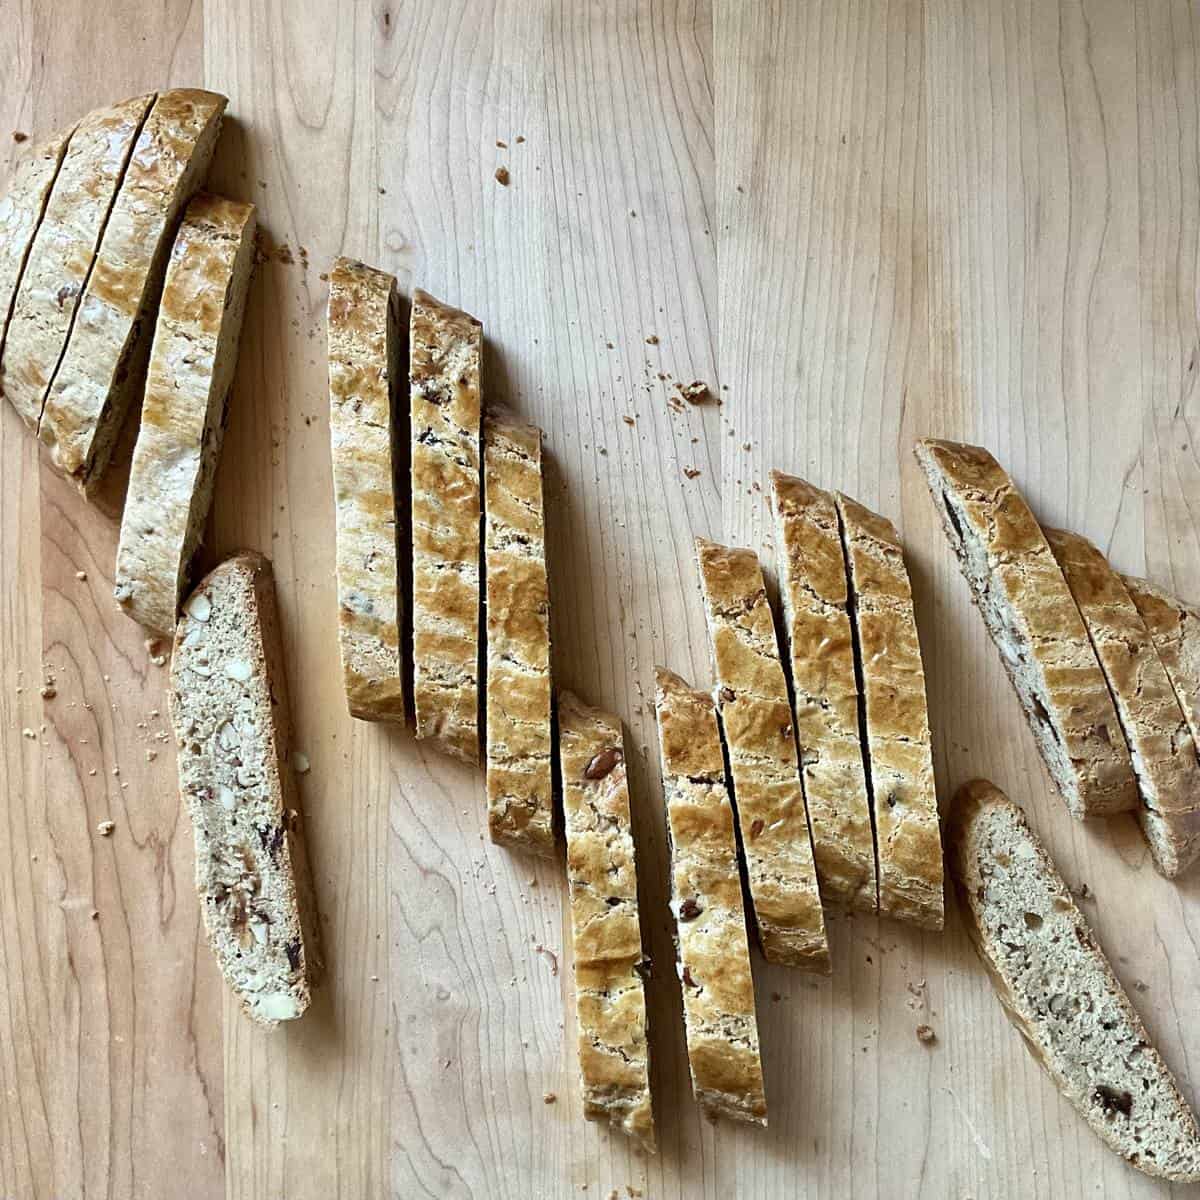 Sliced biscotti on a wooden board ready for a second bake.